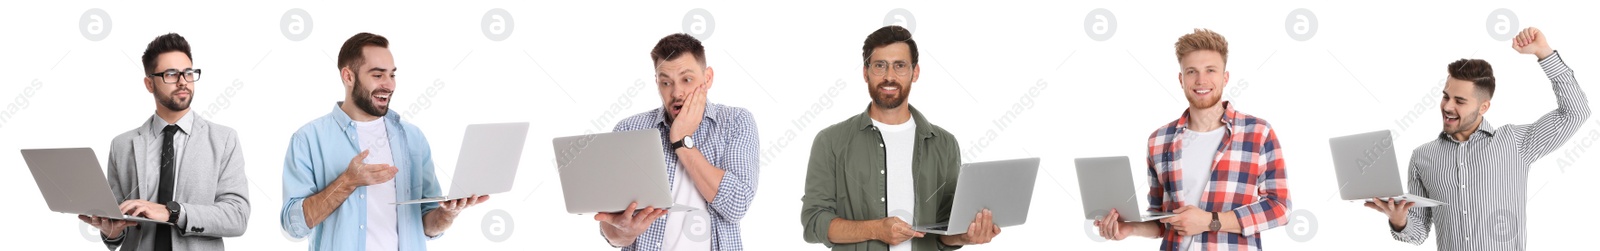 Image of Collage with photos of men holding modern laptops on white background. Banner design